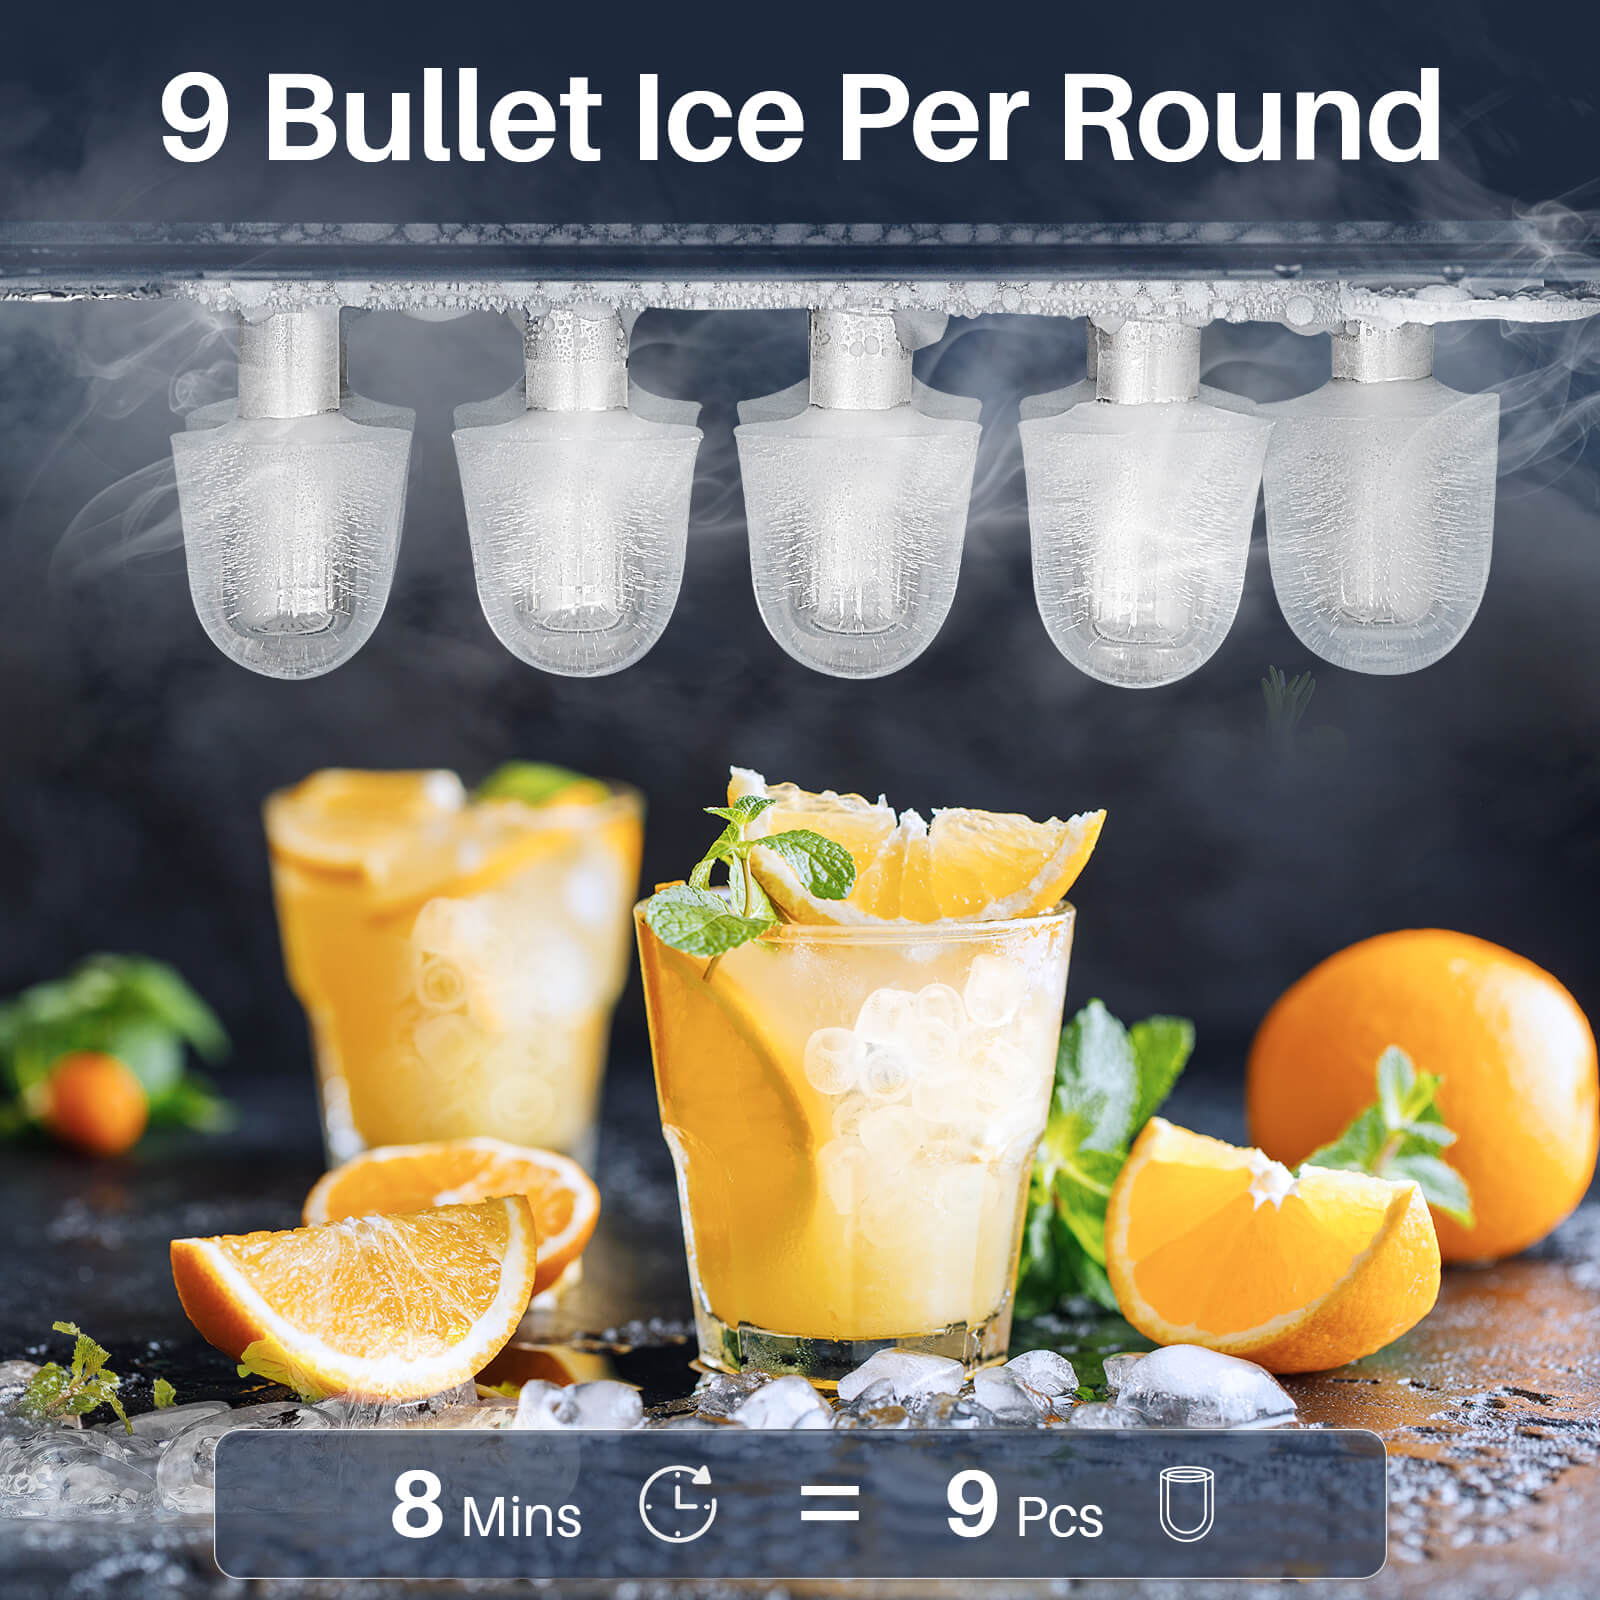 Orgo Product The Retro Countertop Ice Maker, Bullet Shaped Ice Type, Sage, RGR2502